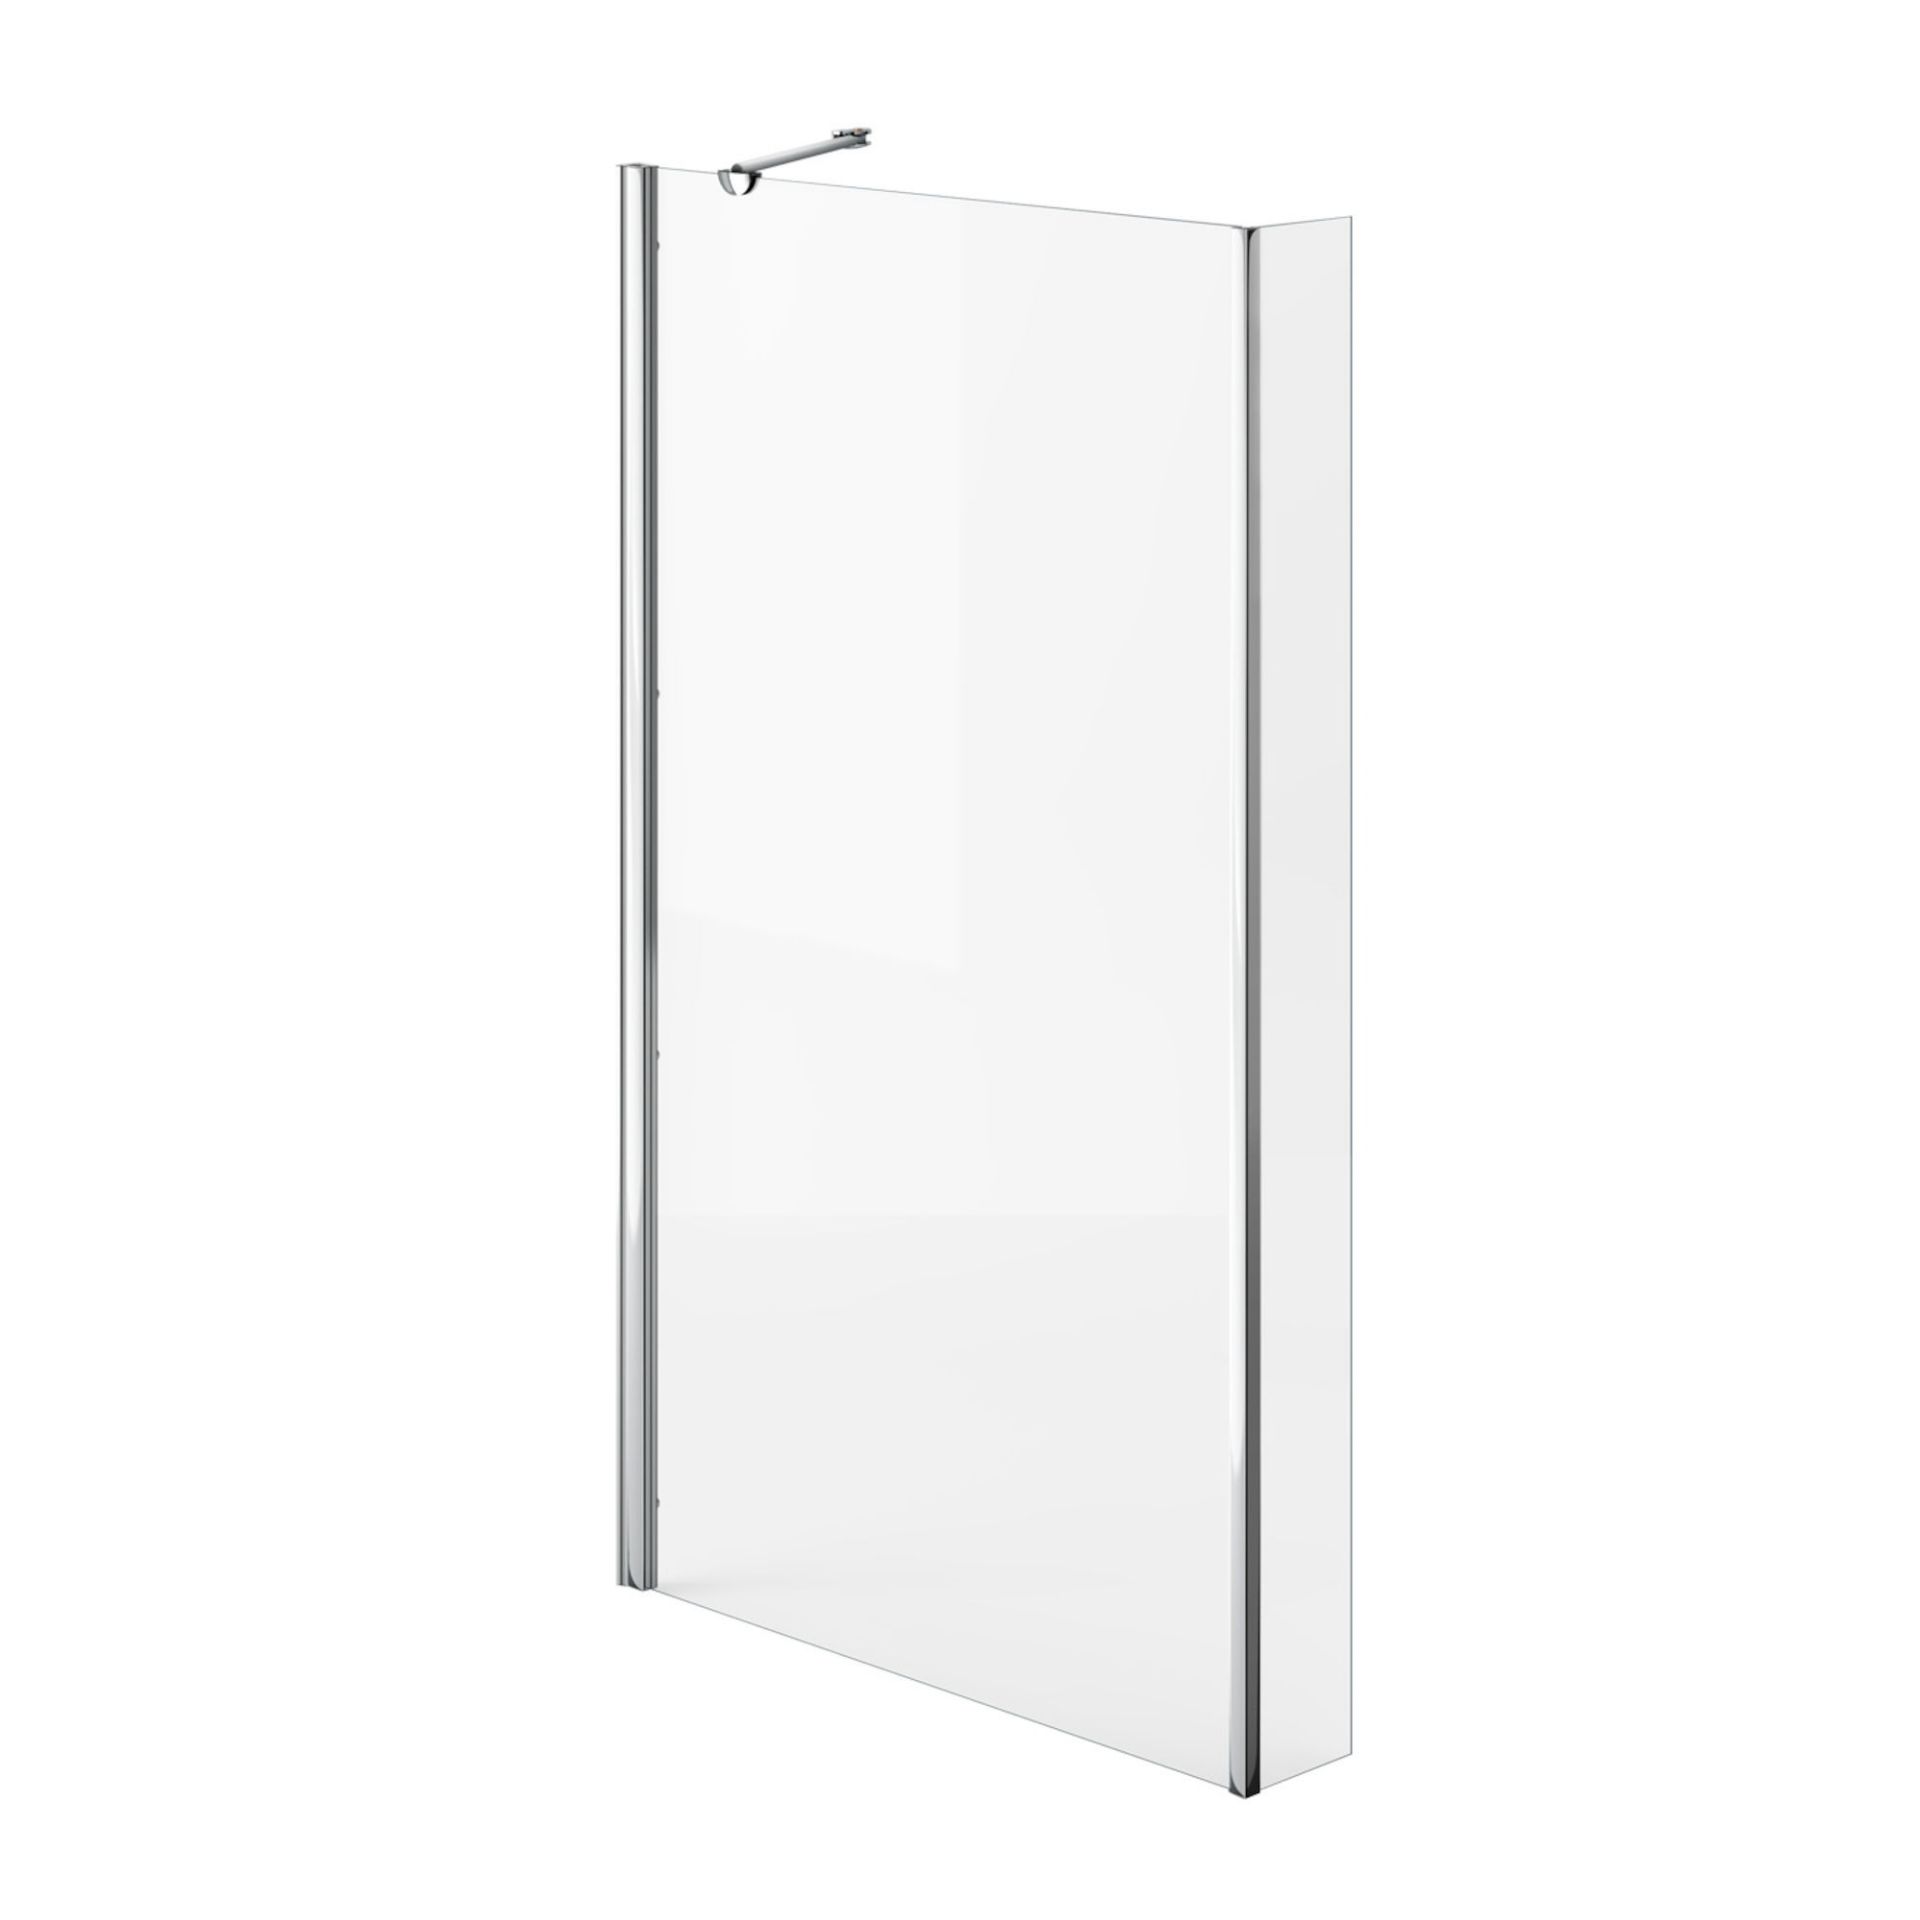 (DW57) 805mm L Shape Bath Screen. RRP £189.99 4mm Tempered Saftey Glass Screen comes complete...